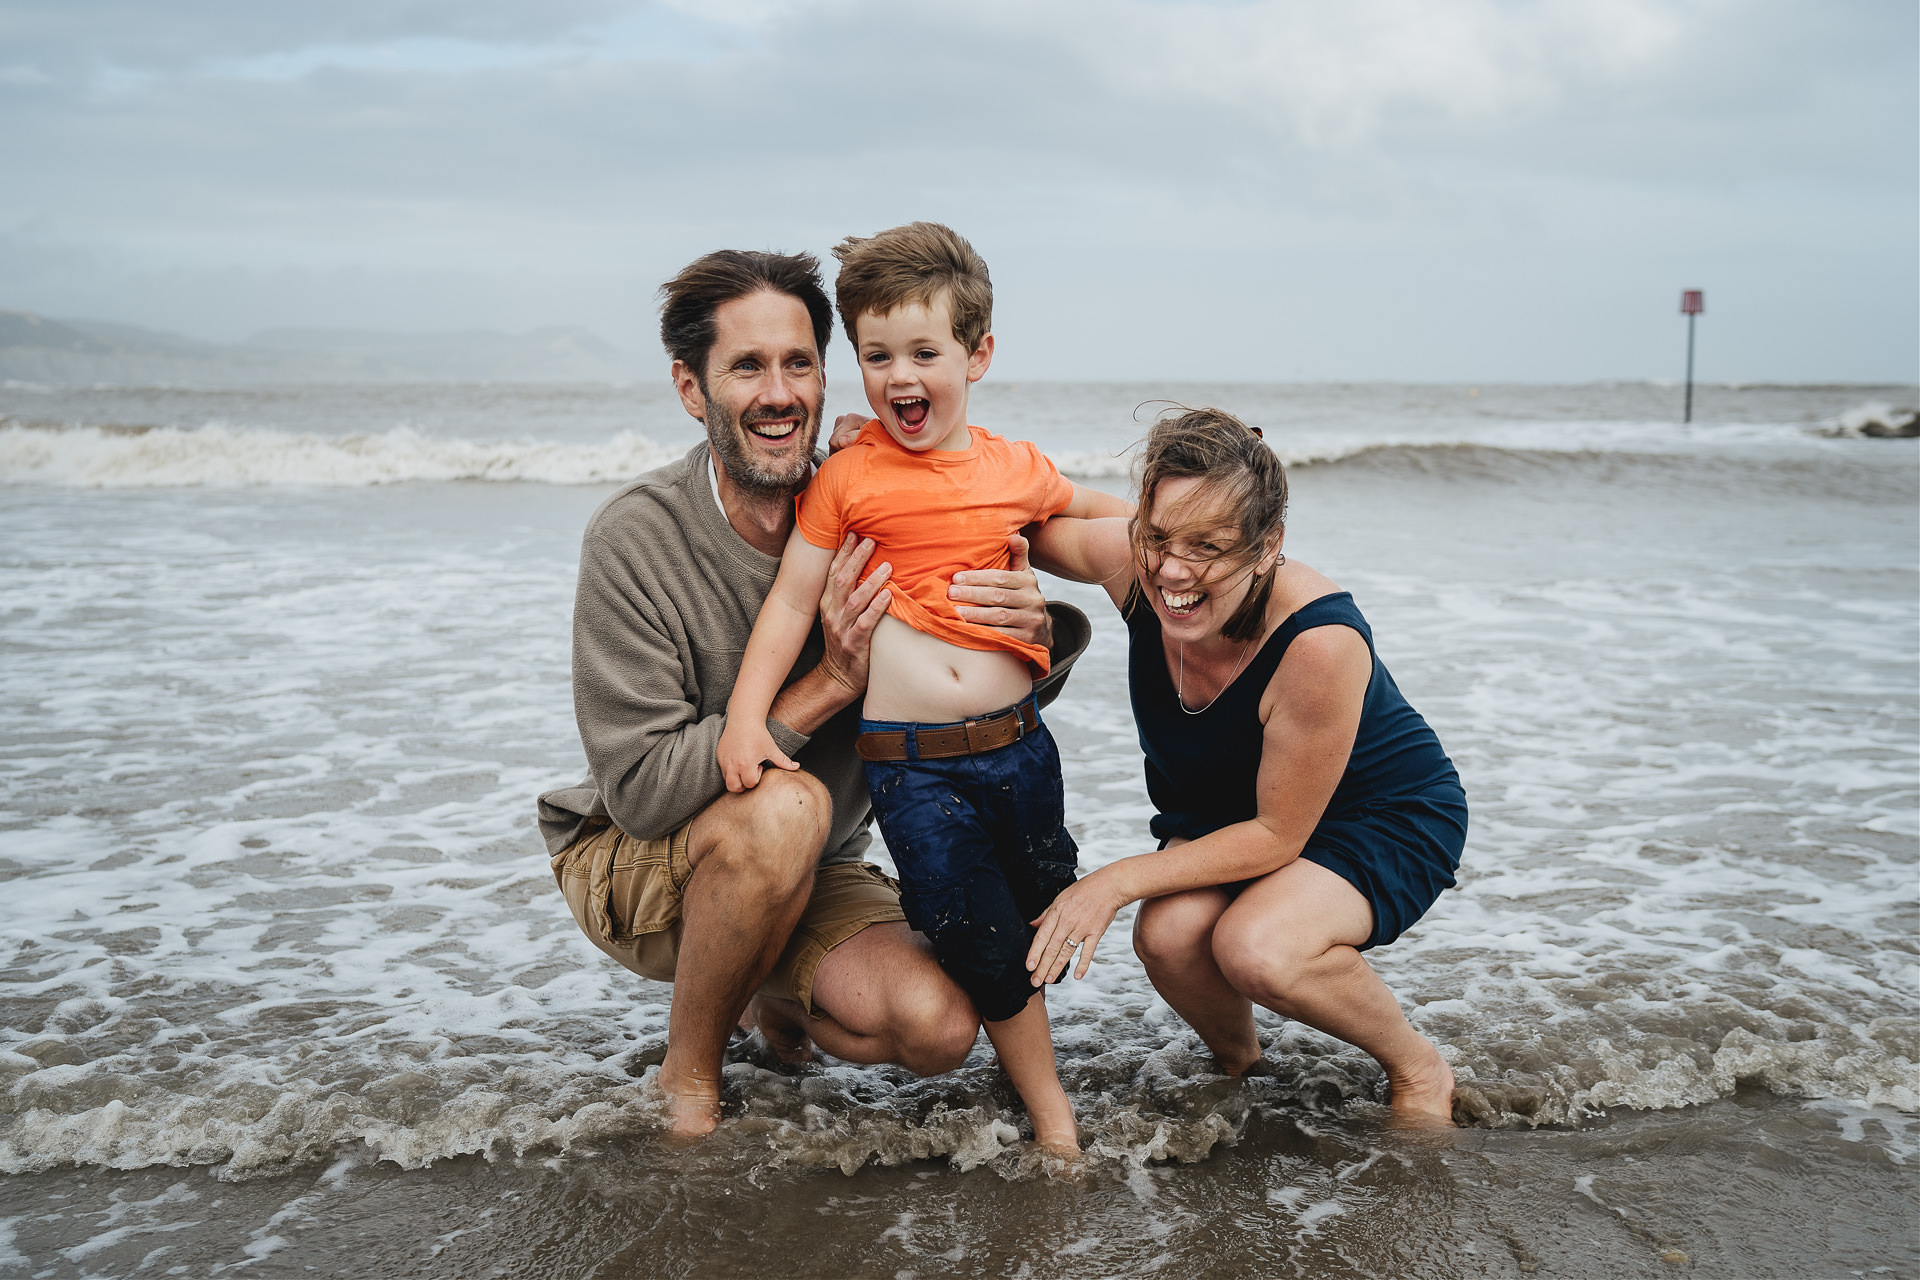 Fun family photography in Devon with parents and child laughing together in the sea